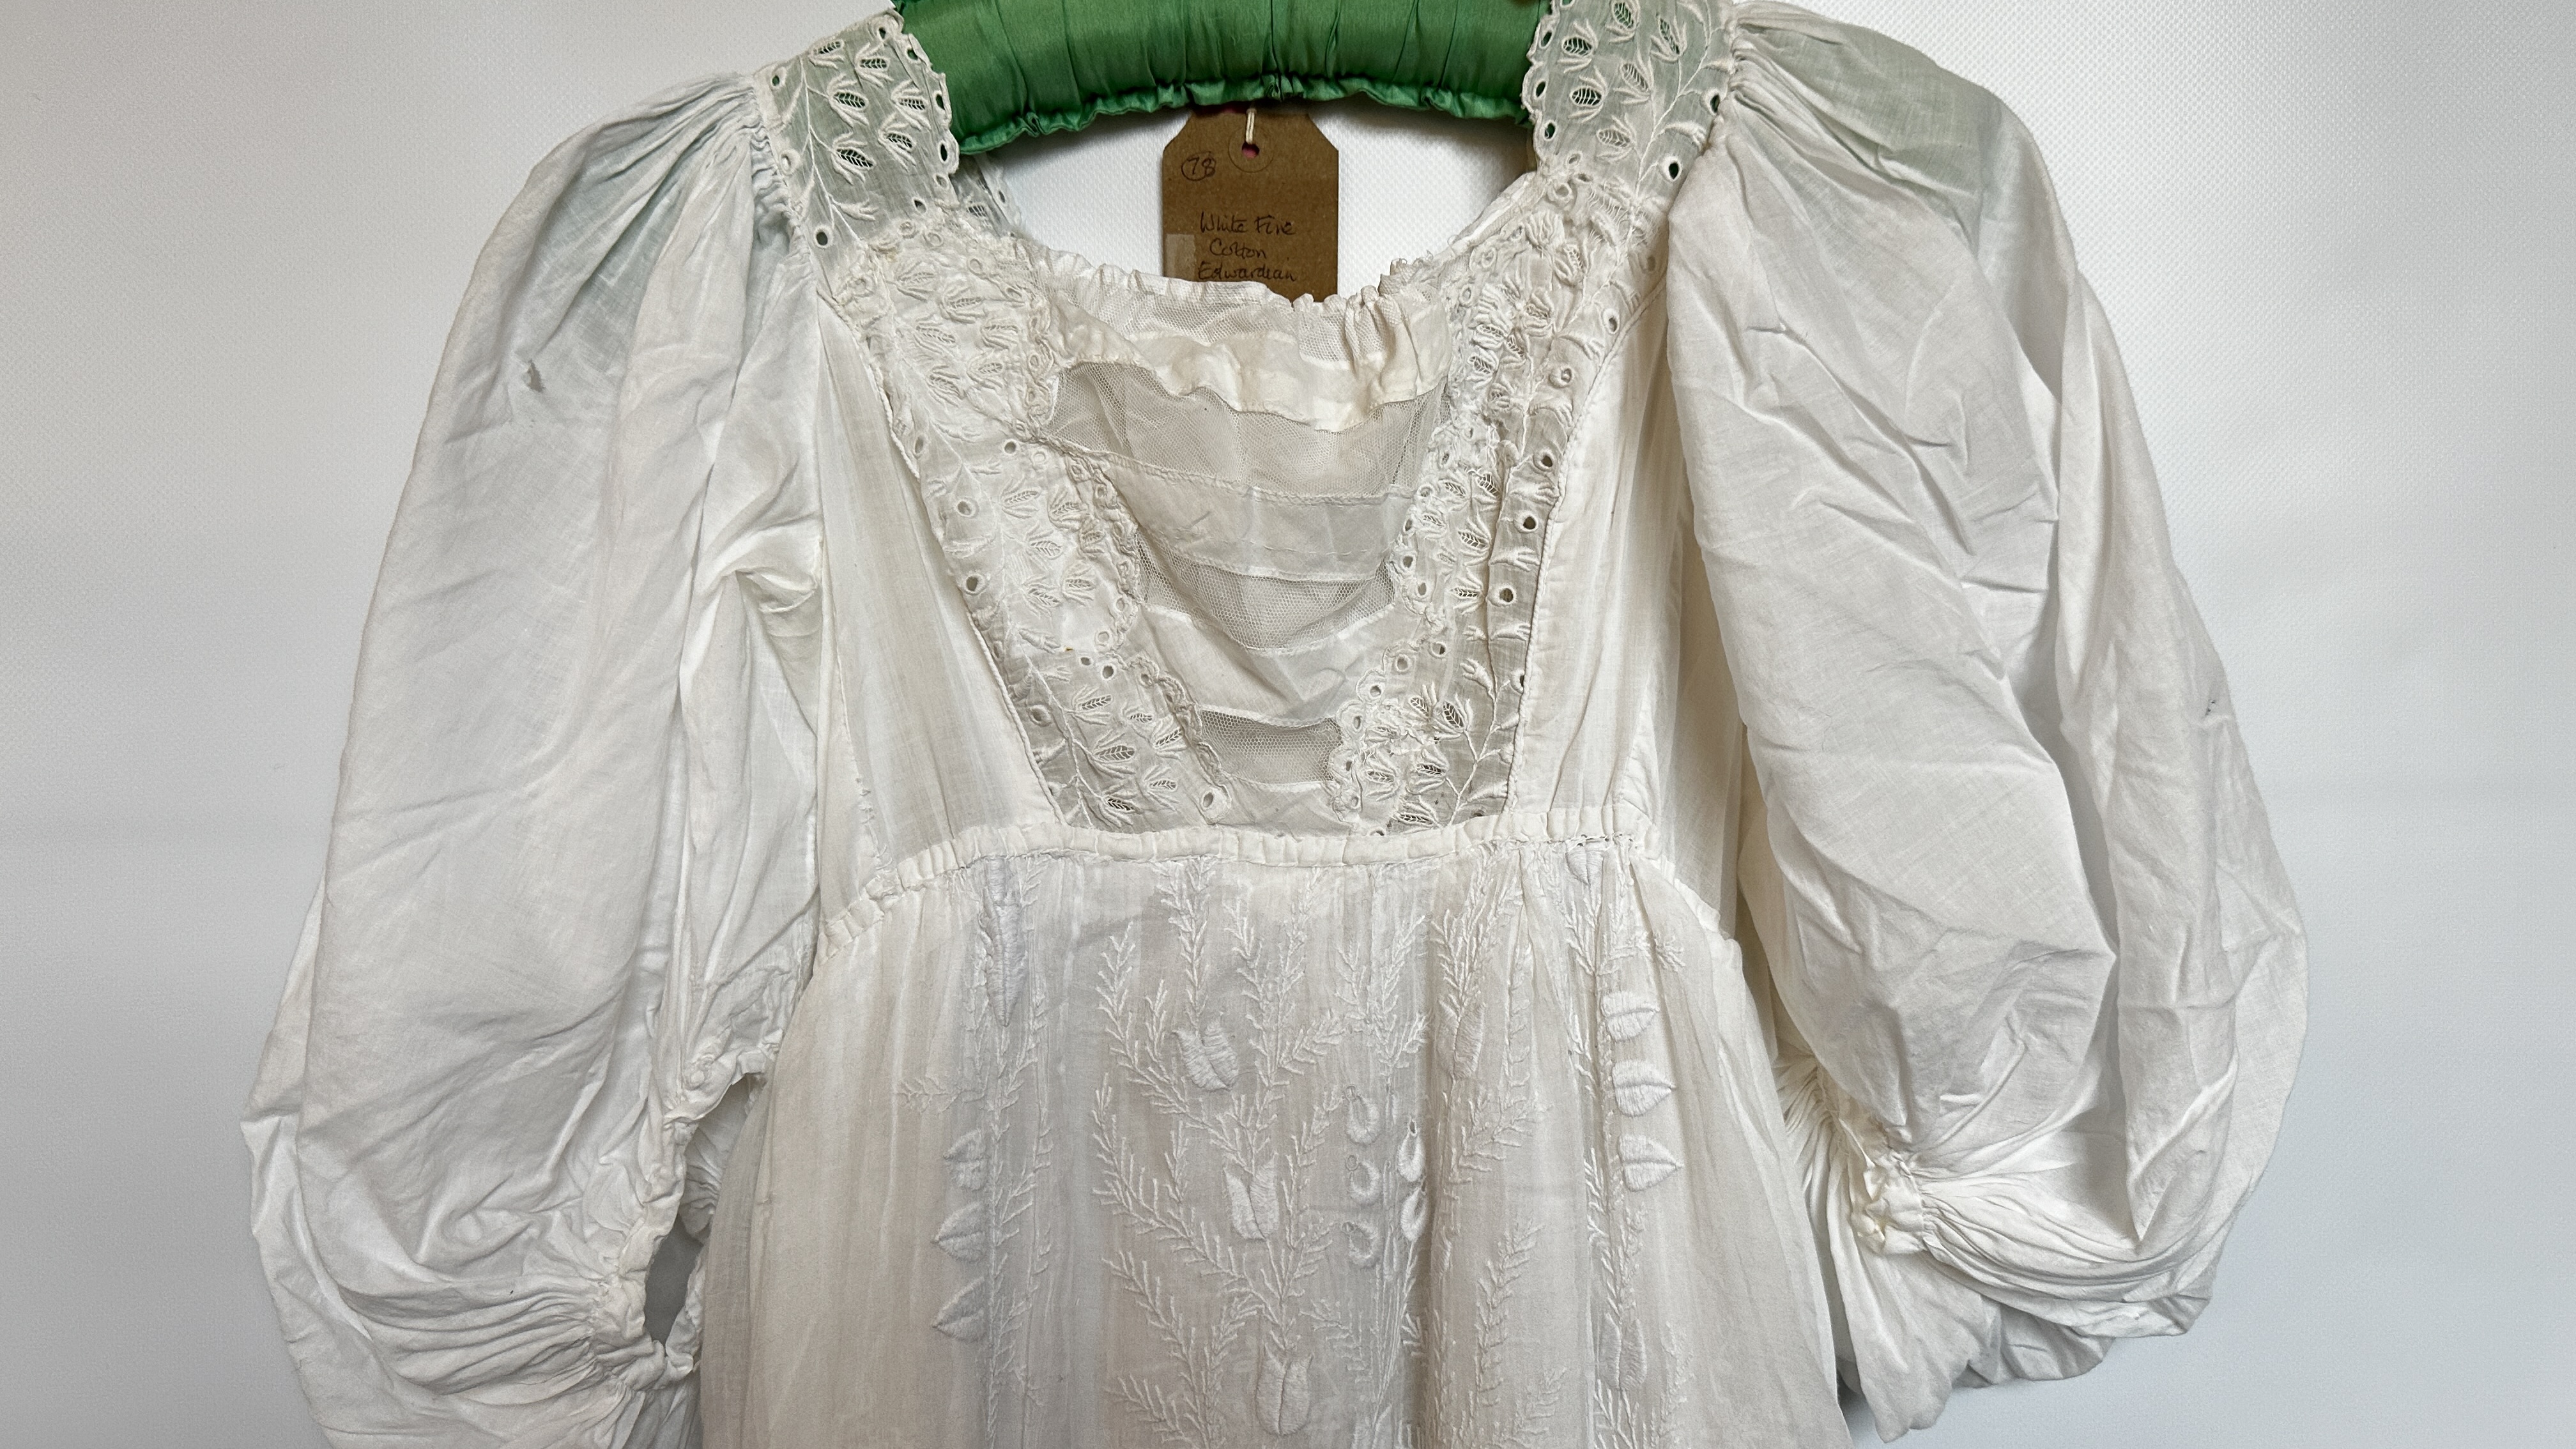 FINE WHITE COTTON EDWARDIAN DRESS, ALL OVER EMBROIDERY, EMPIRE LINE, PUFFED SLEEVES - A/F CONDITION, - Image 3 of 20